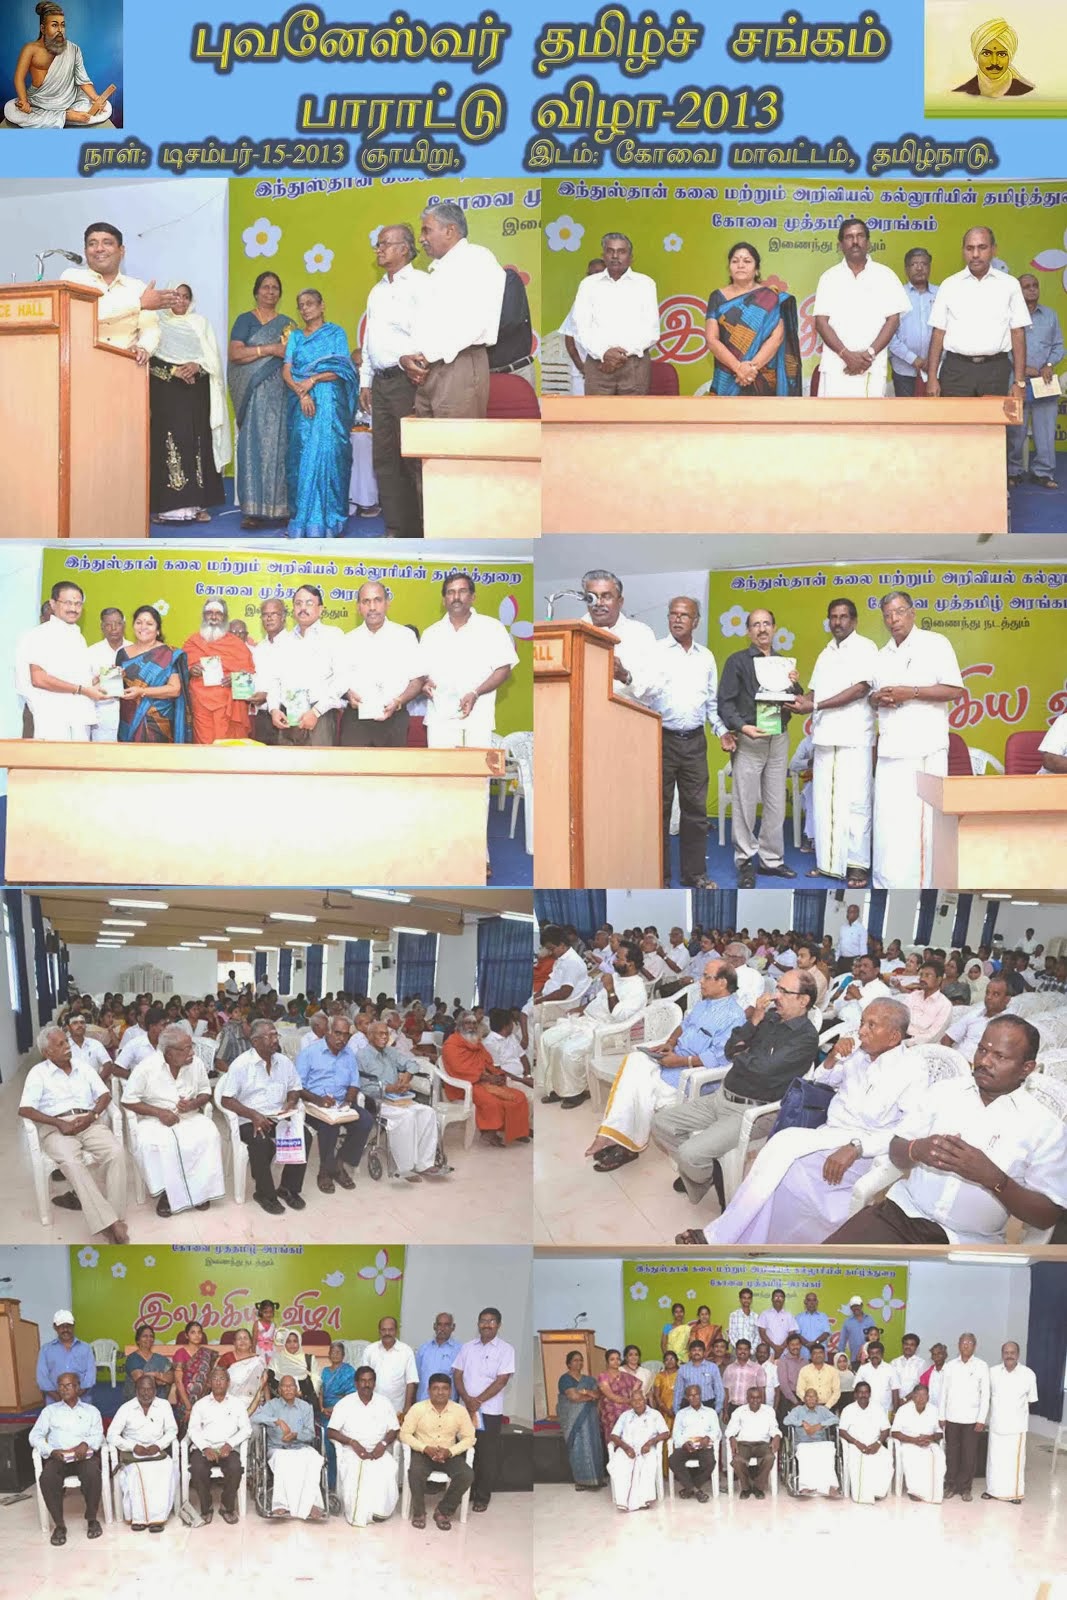 BTS : Covai - Tamil Welcome Function, Date : 15-Dec-2013 ( Sunday )